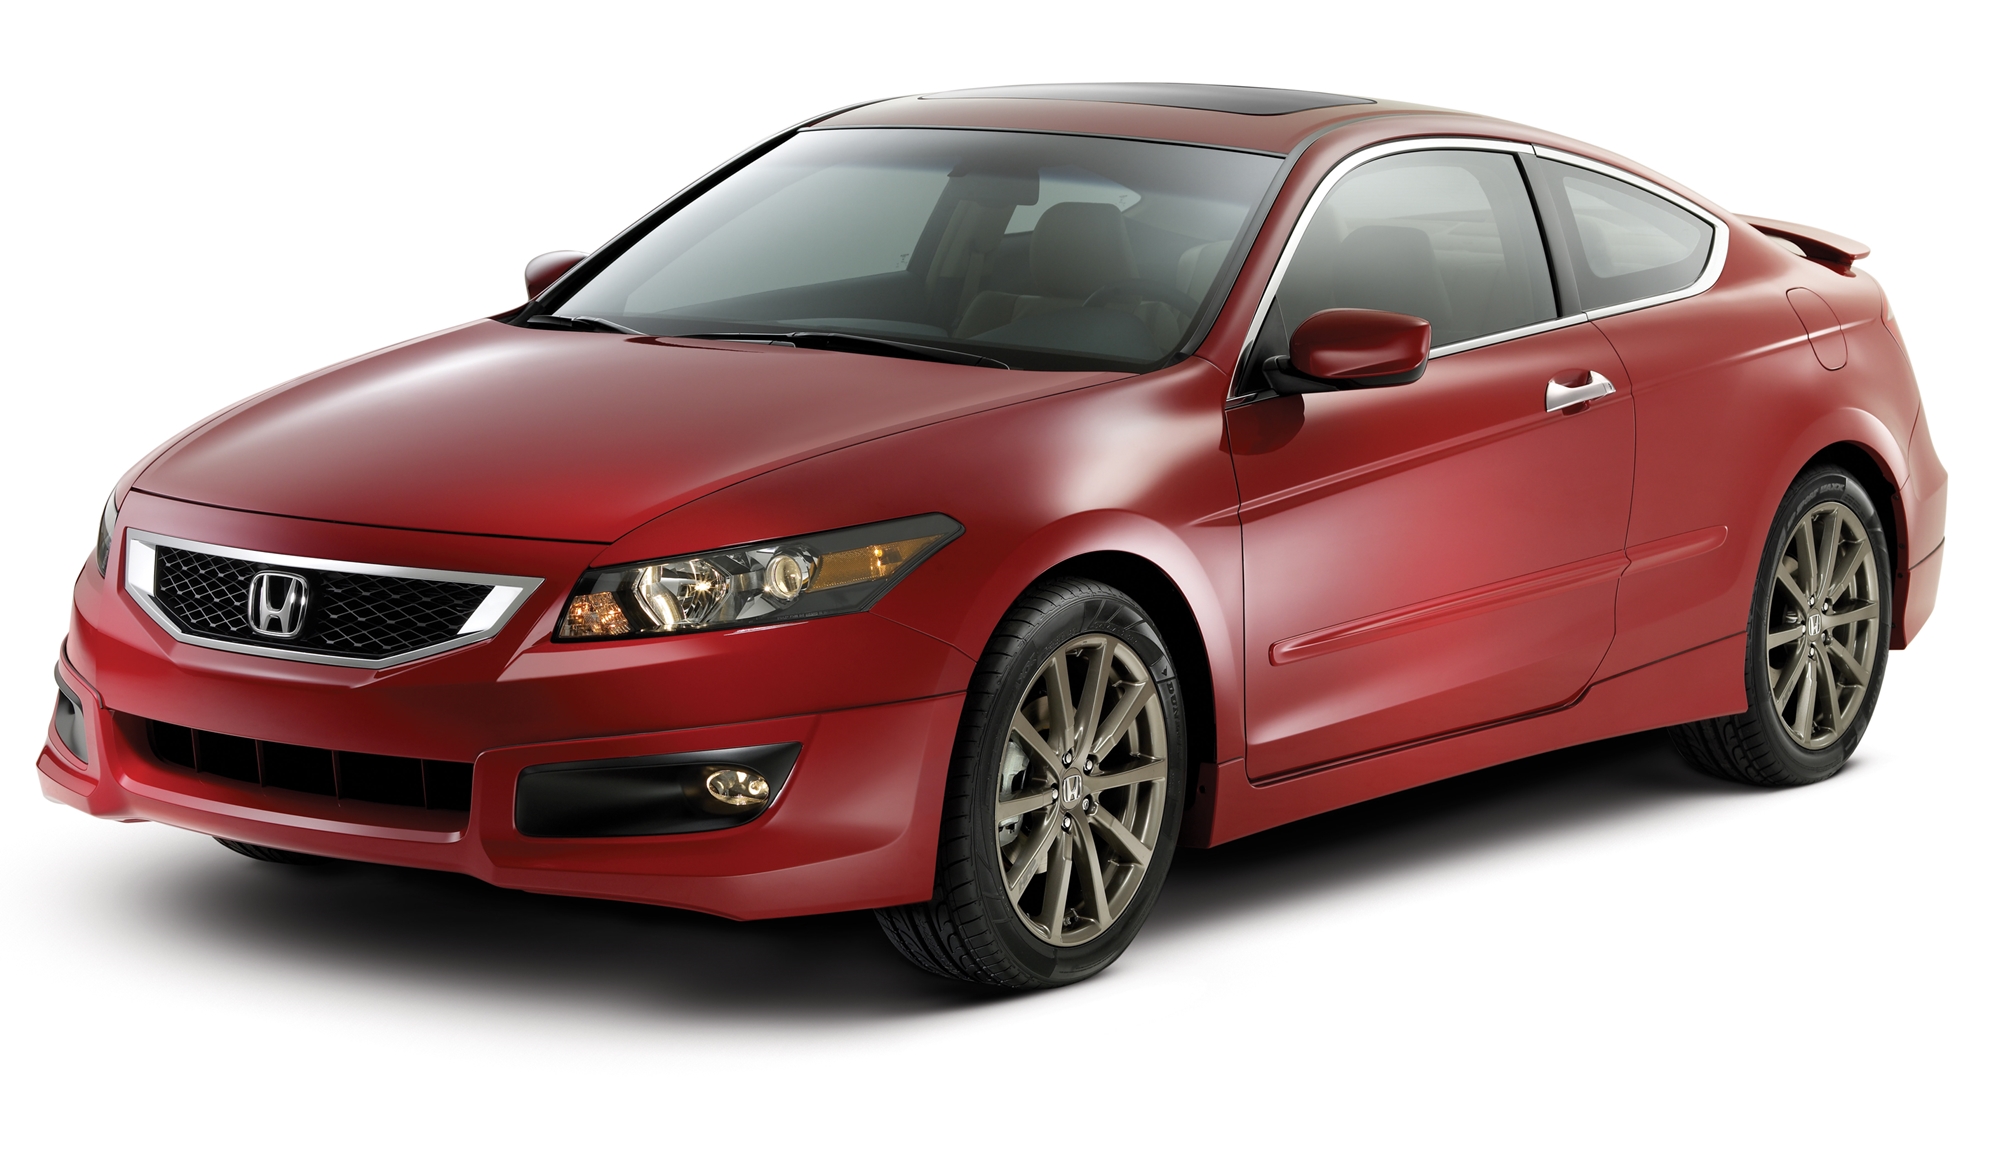 2008 Honda Accord Coupe EX-L V6 Full Specs, Features and Price | CarBuzz